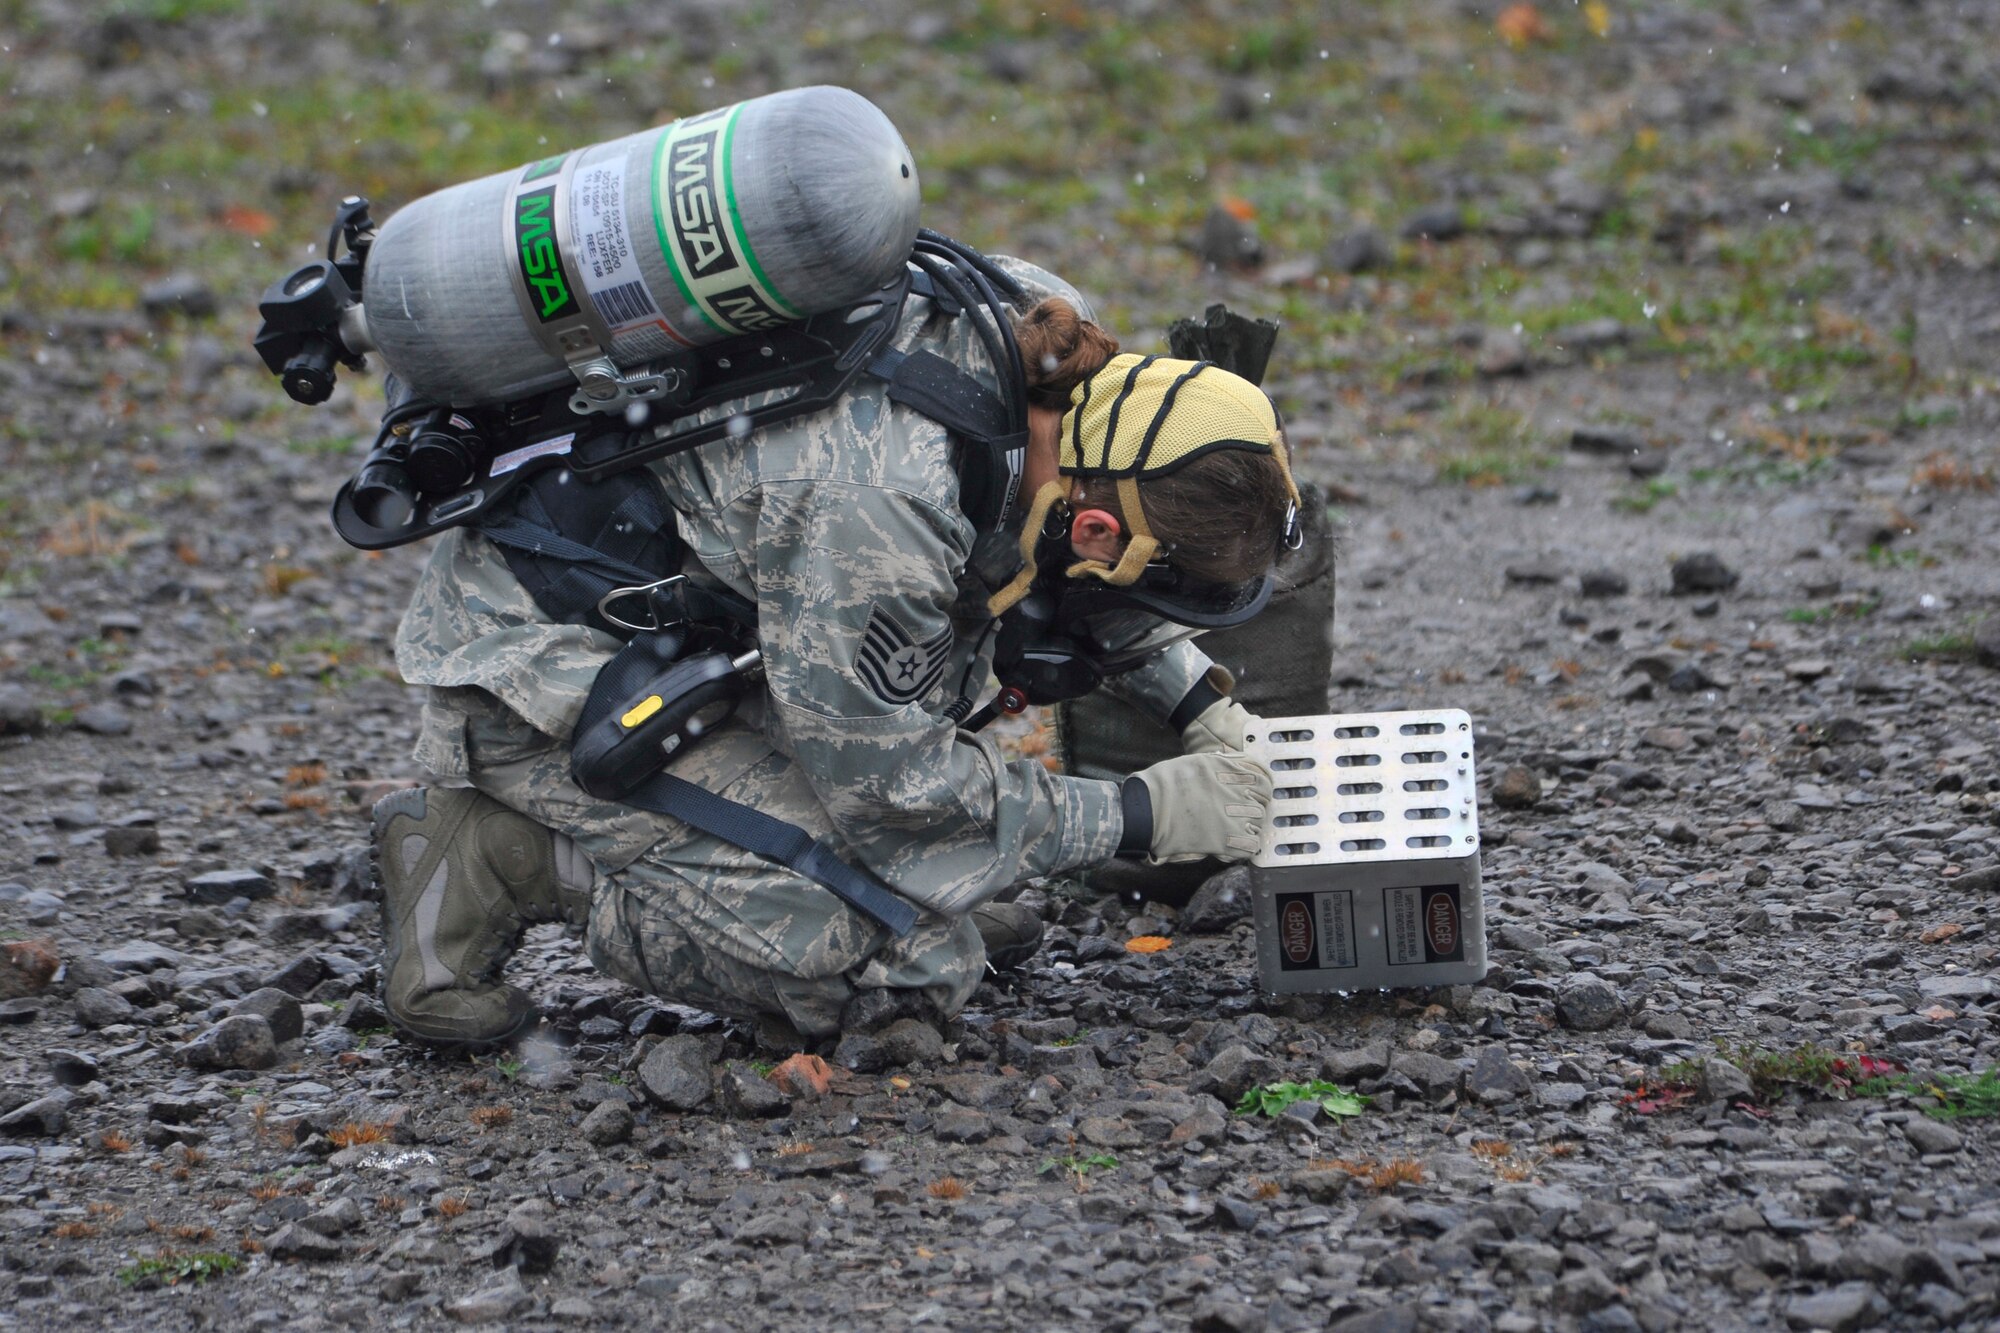 An explosive ordinance technician examines a chaff pod during a major accident response exercise, Rhine Ordnance Barracks, Oct. 27. The exercise tested various units’ ability to respond to a major accident and their aptitude to work together to handle assorted challenges that may arise during a crisis response. (U.S. Air Force photo/Airman 1st Class Trevor Rhynes)